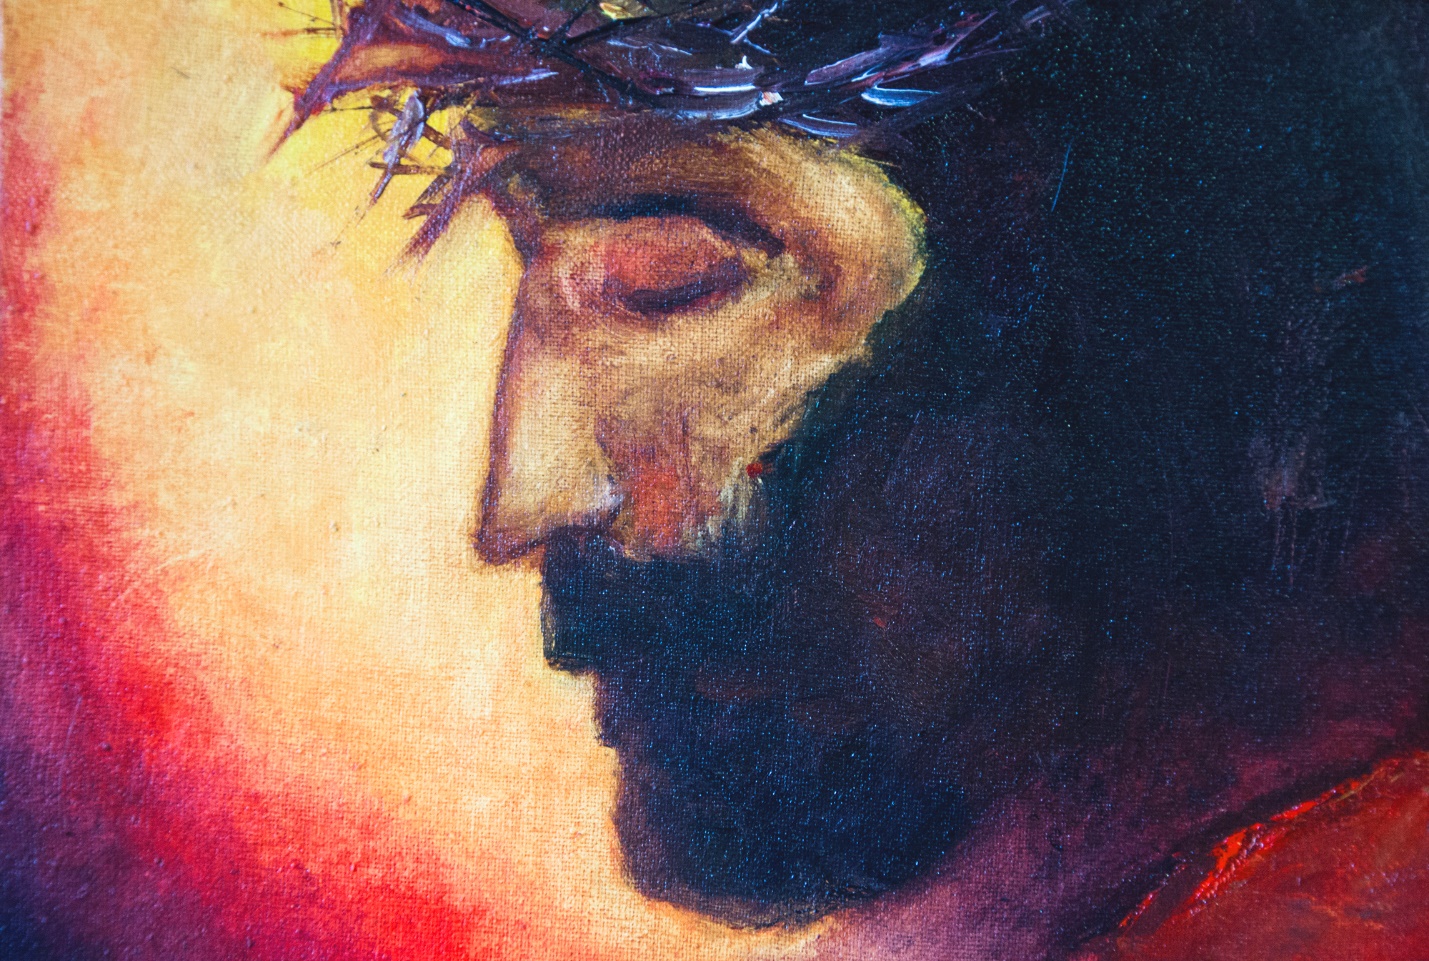 A painting of a person with a crown of thorns

Description automatically generated